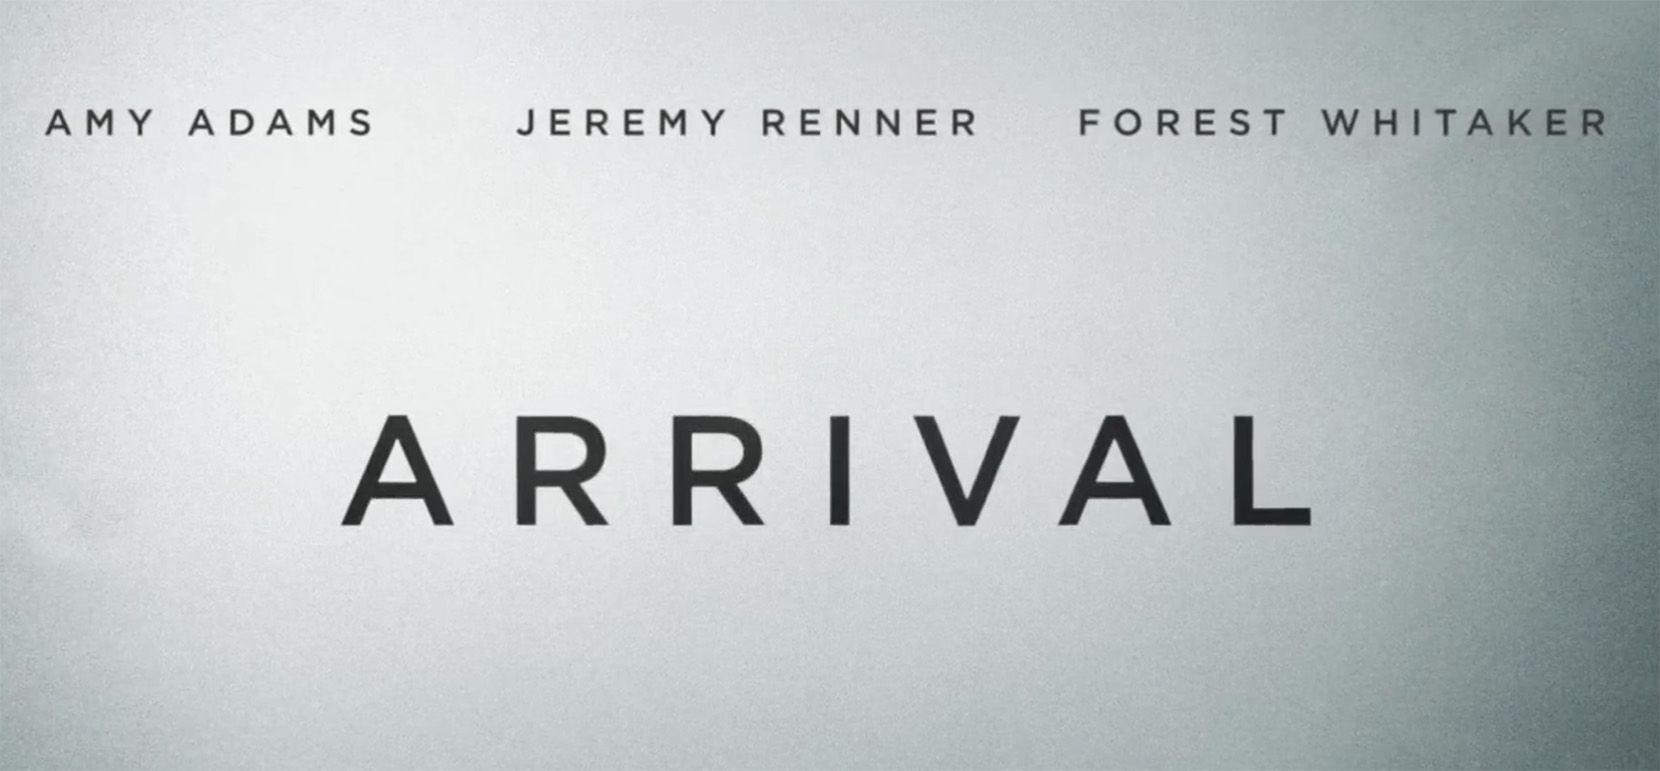 Aliens Film Logo - The 'Arrival' Trailer Has Amy Adams and Jeremy Renner Meeting Aliens ...